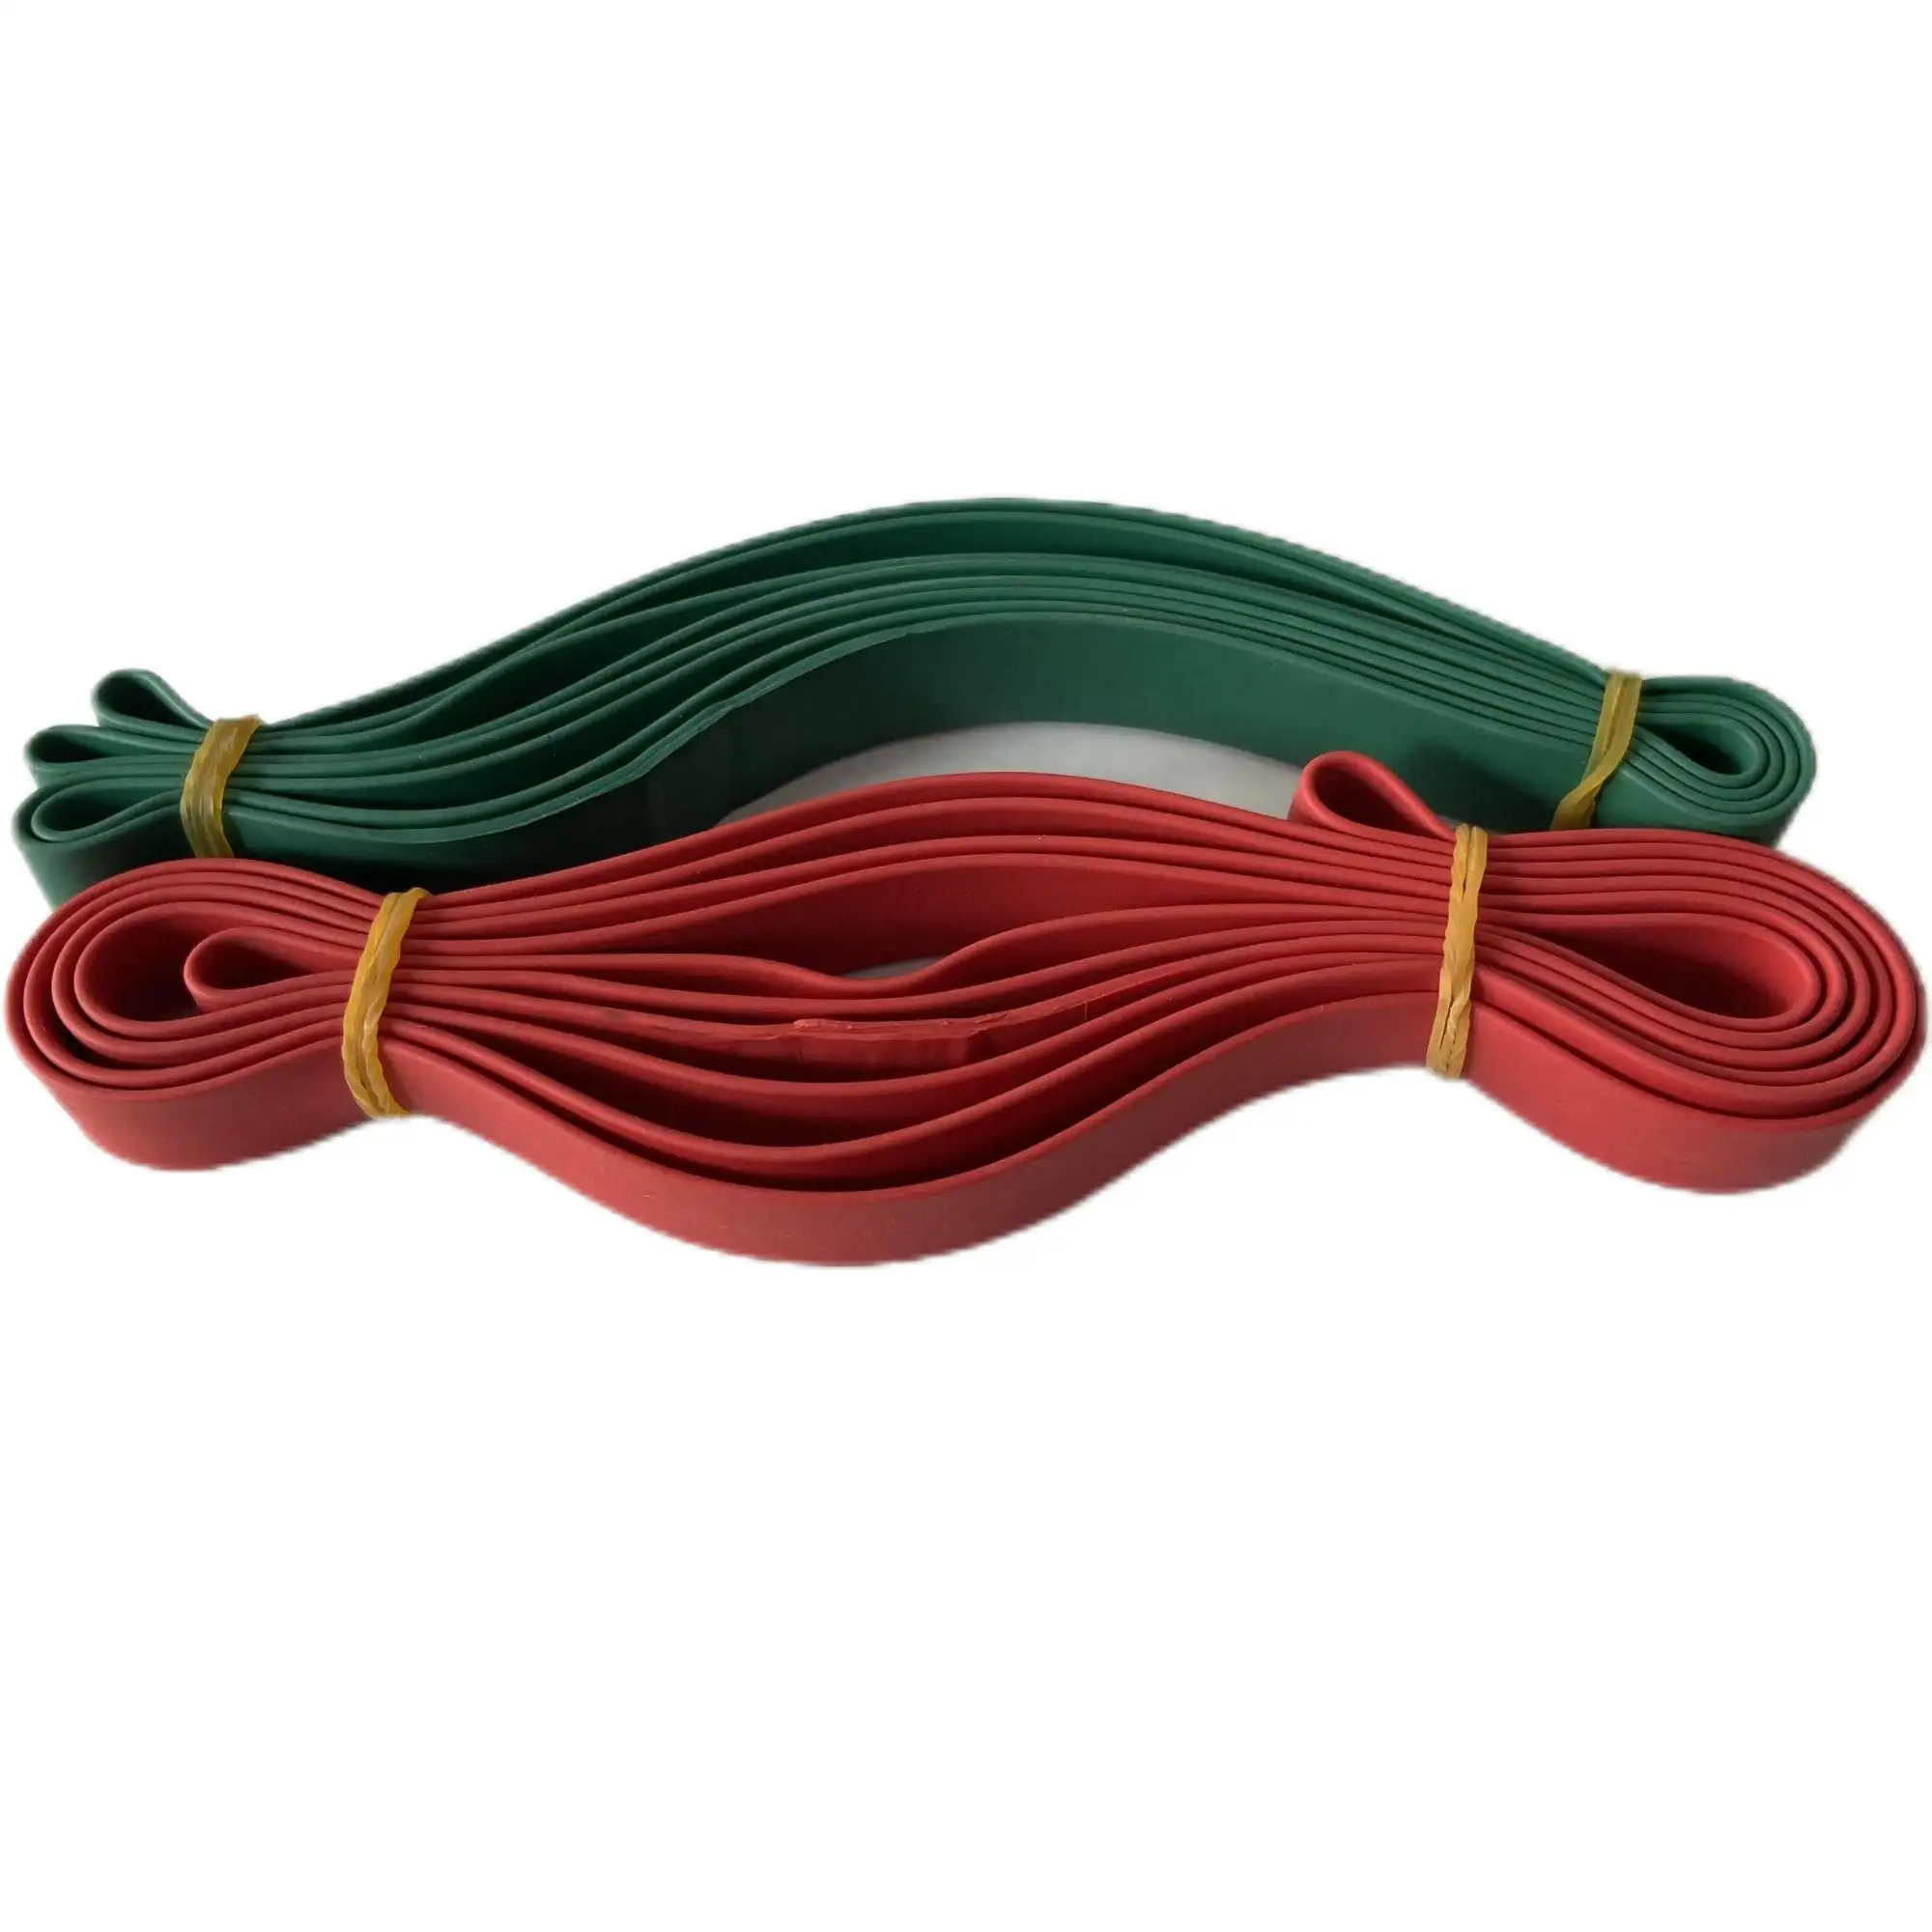 Wear-resistant  aging-resistant  and low-temperature-resistant green rubber band